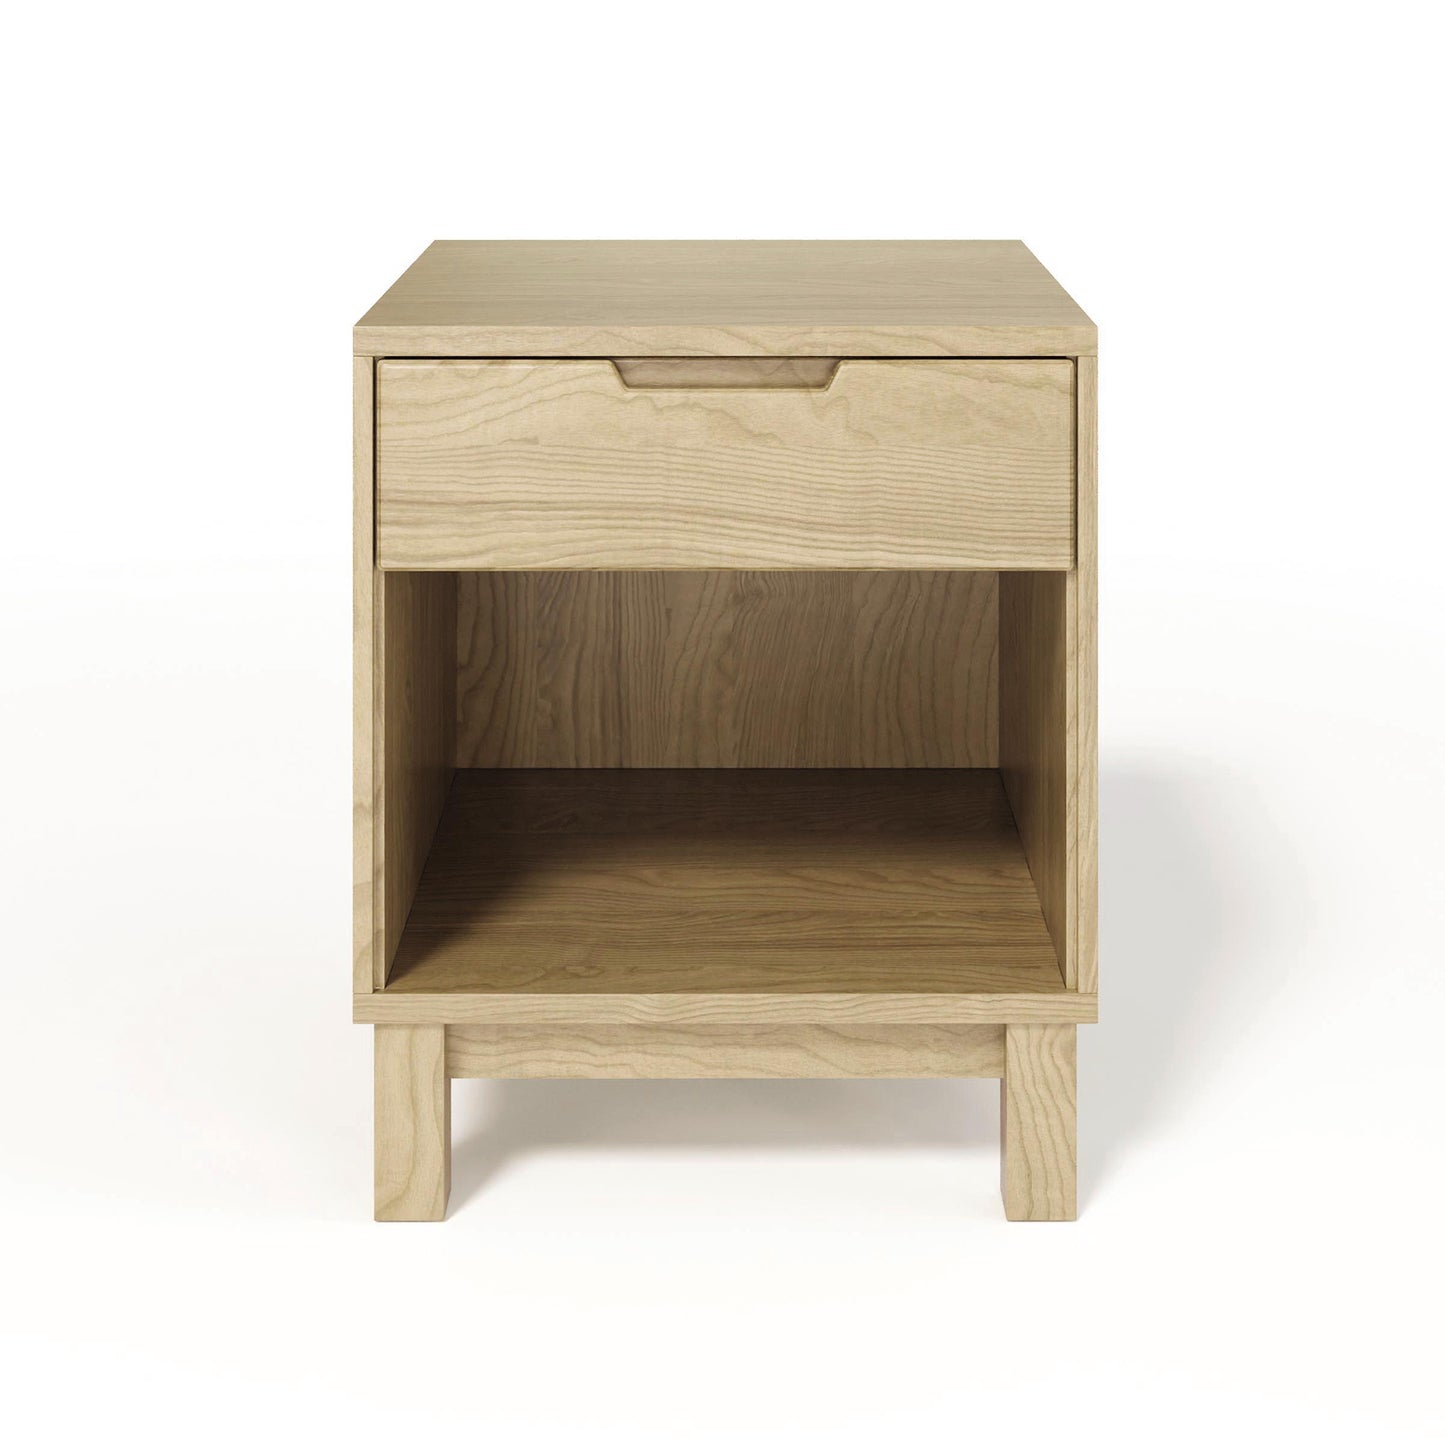 A Vermont handcrafted solid oak hardwood Copeland Furniture Oslo 1-Drawer Enclosed Shelf Nightstand, on a white background.